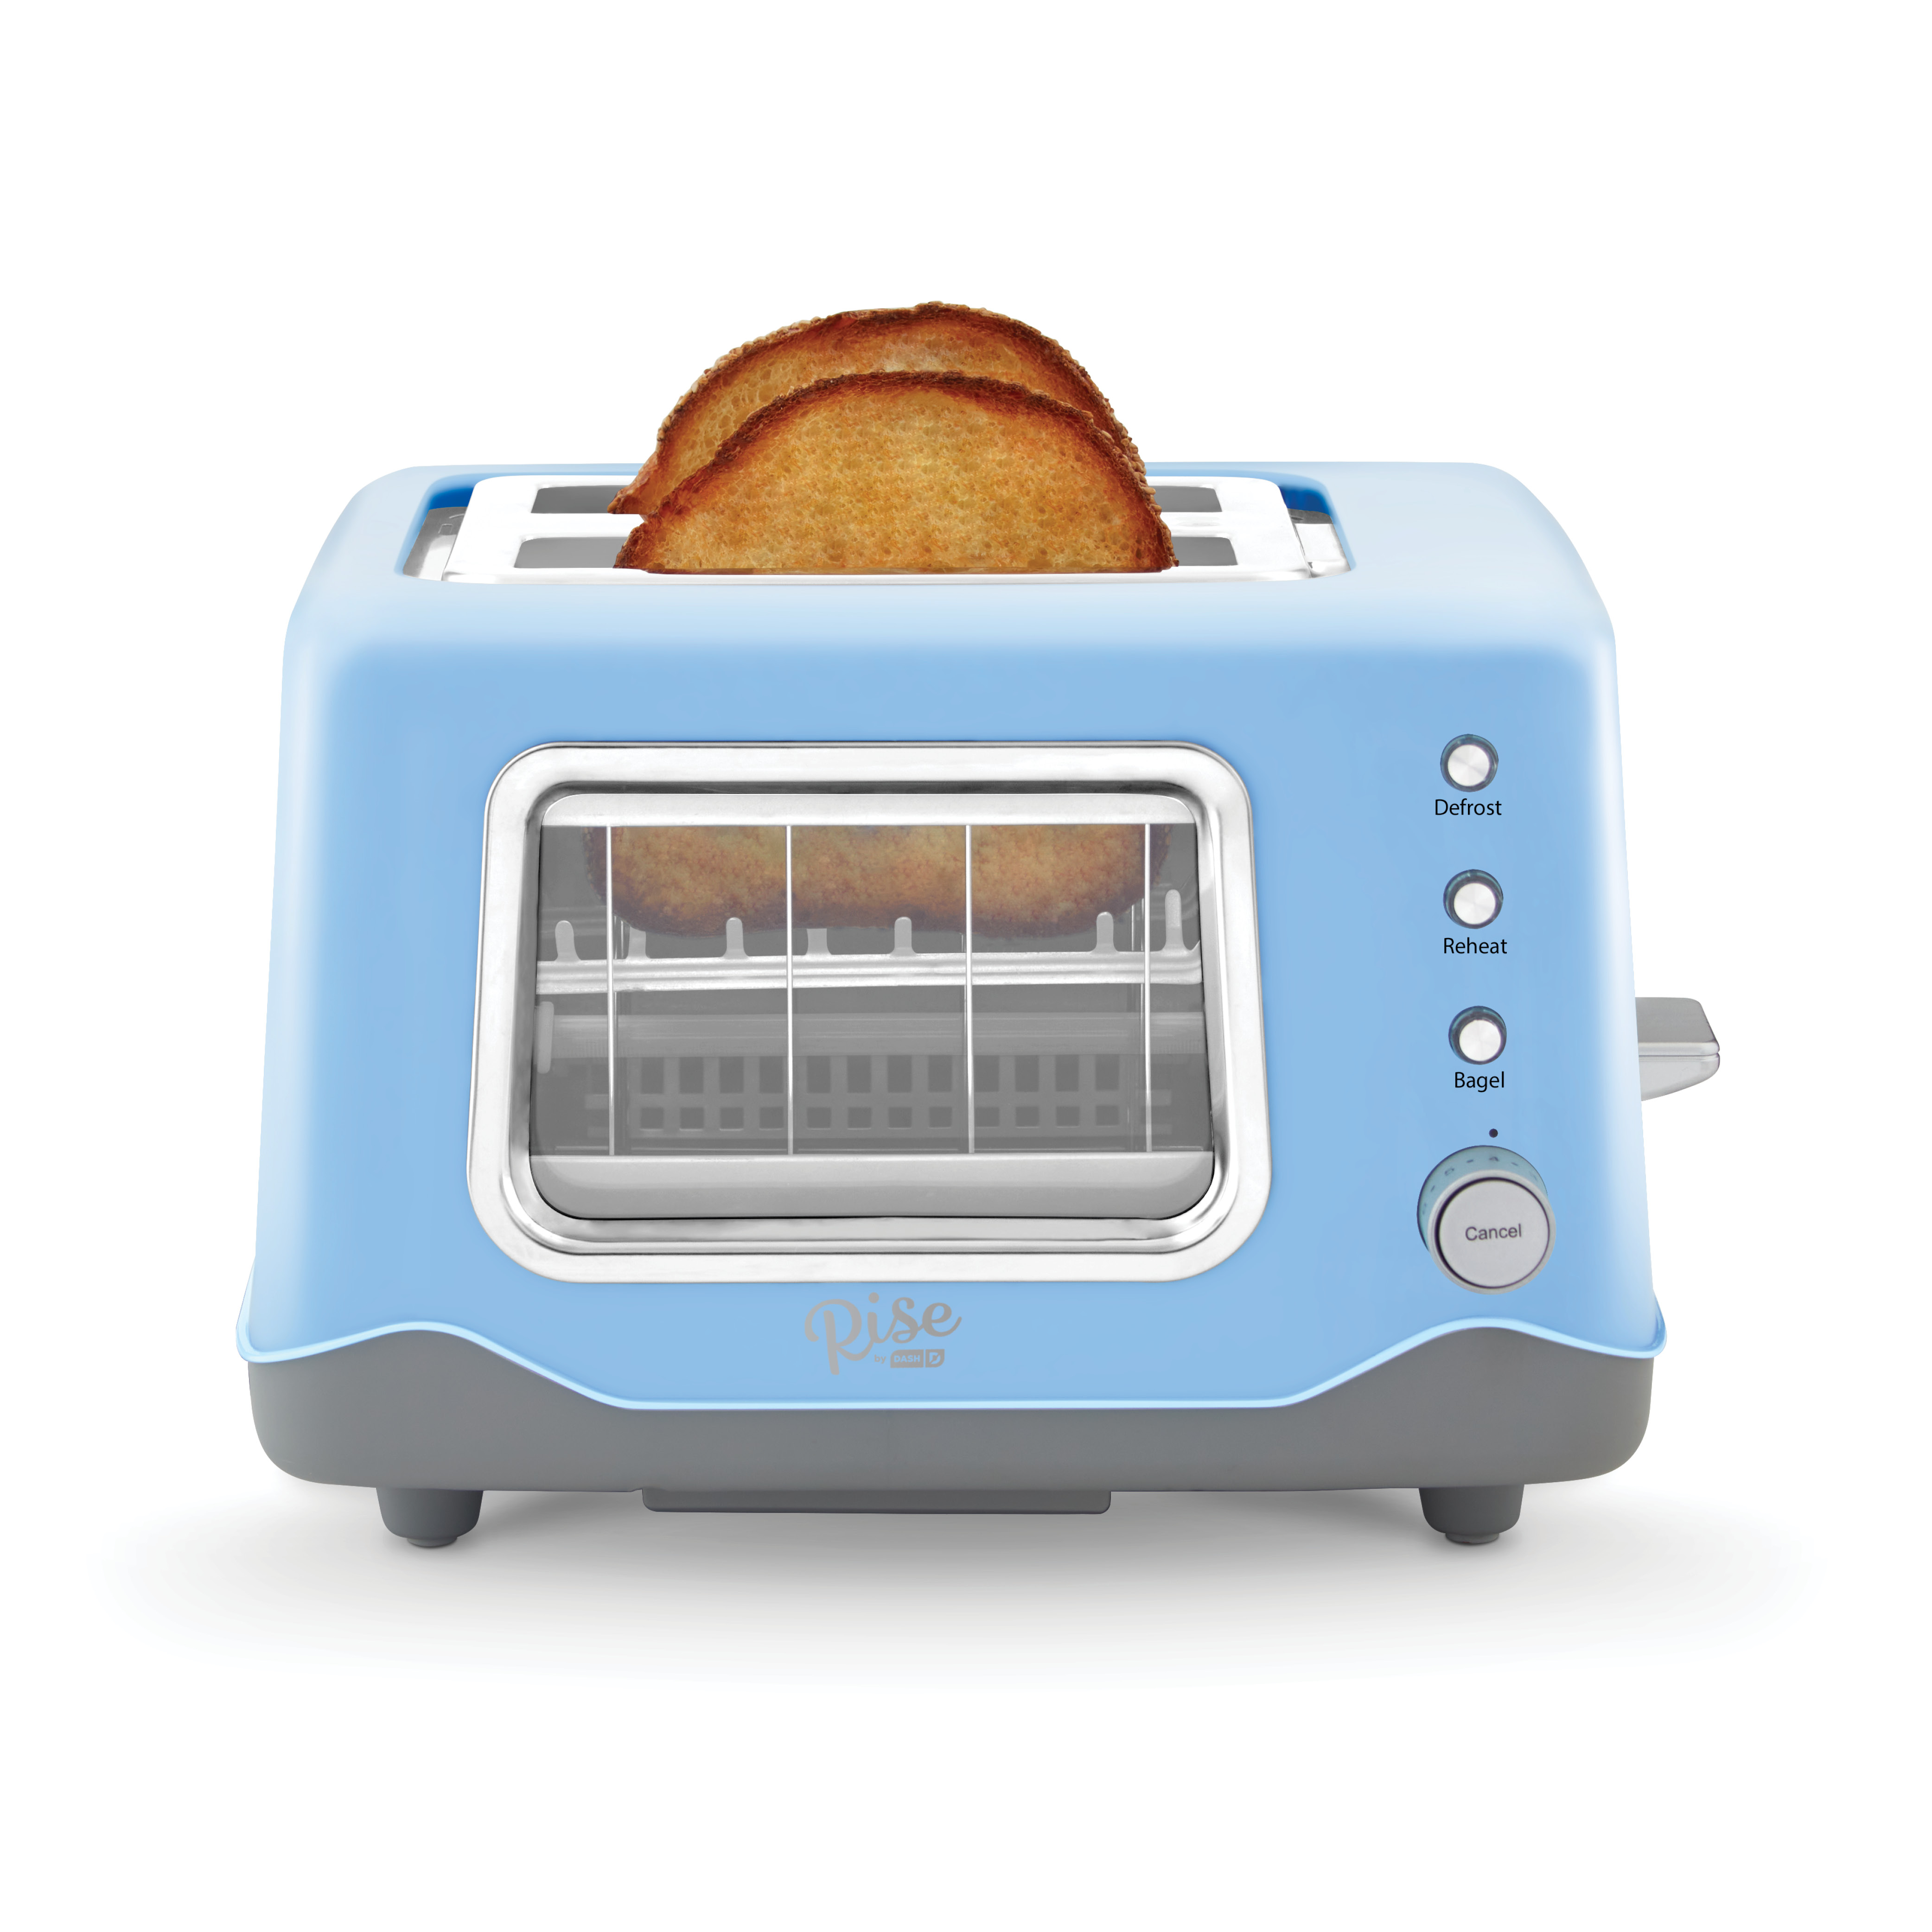 Rise by Dash Clear View Window 2-Slice Toaster Blue - Defrost, Reheat, Bagel, Auto Shut off, New - image 1 of 7